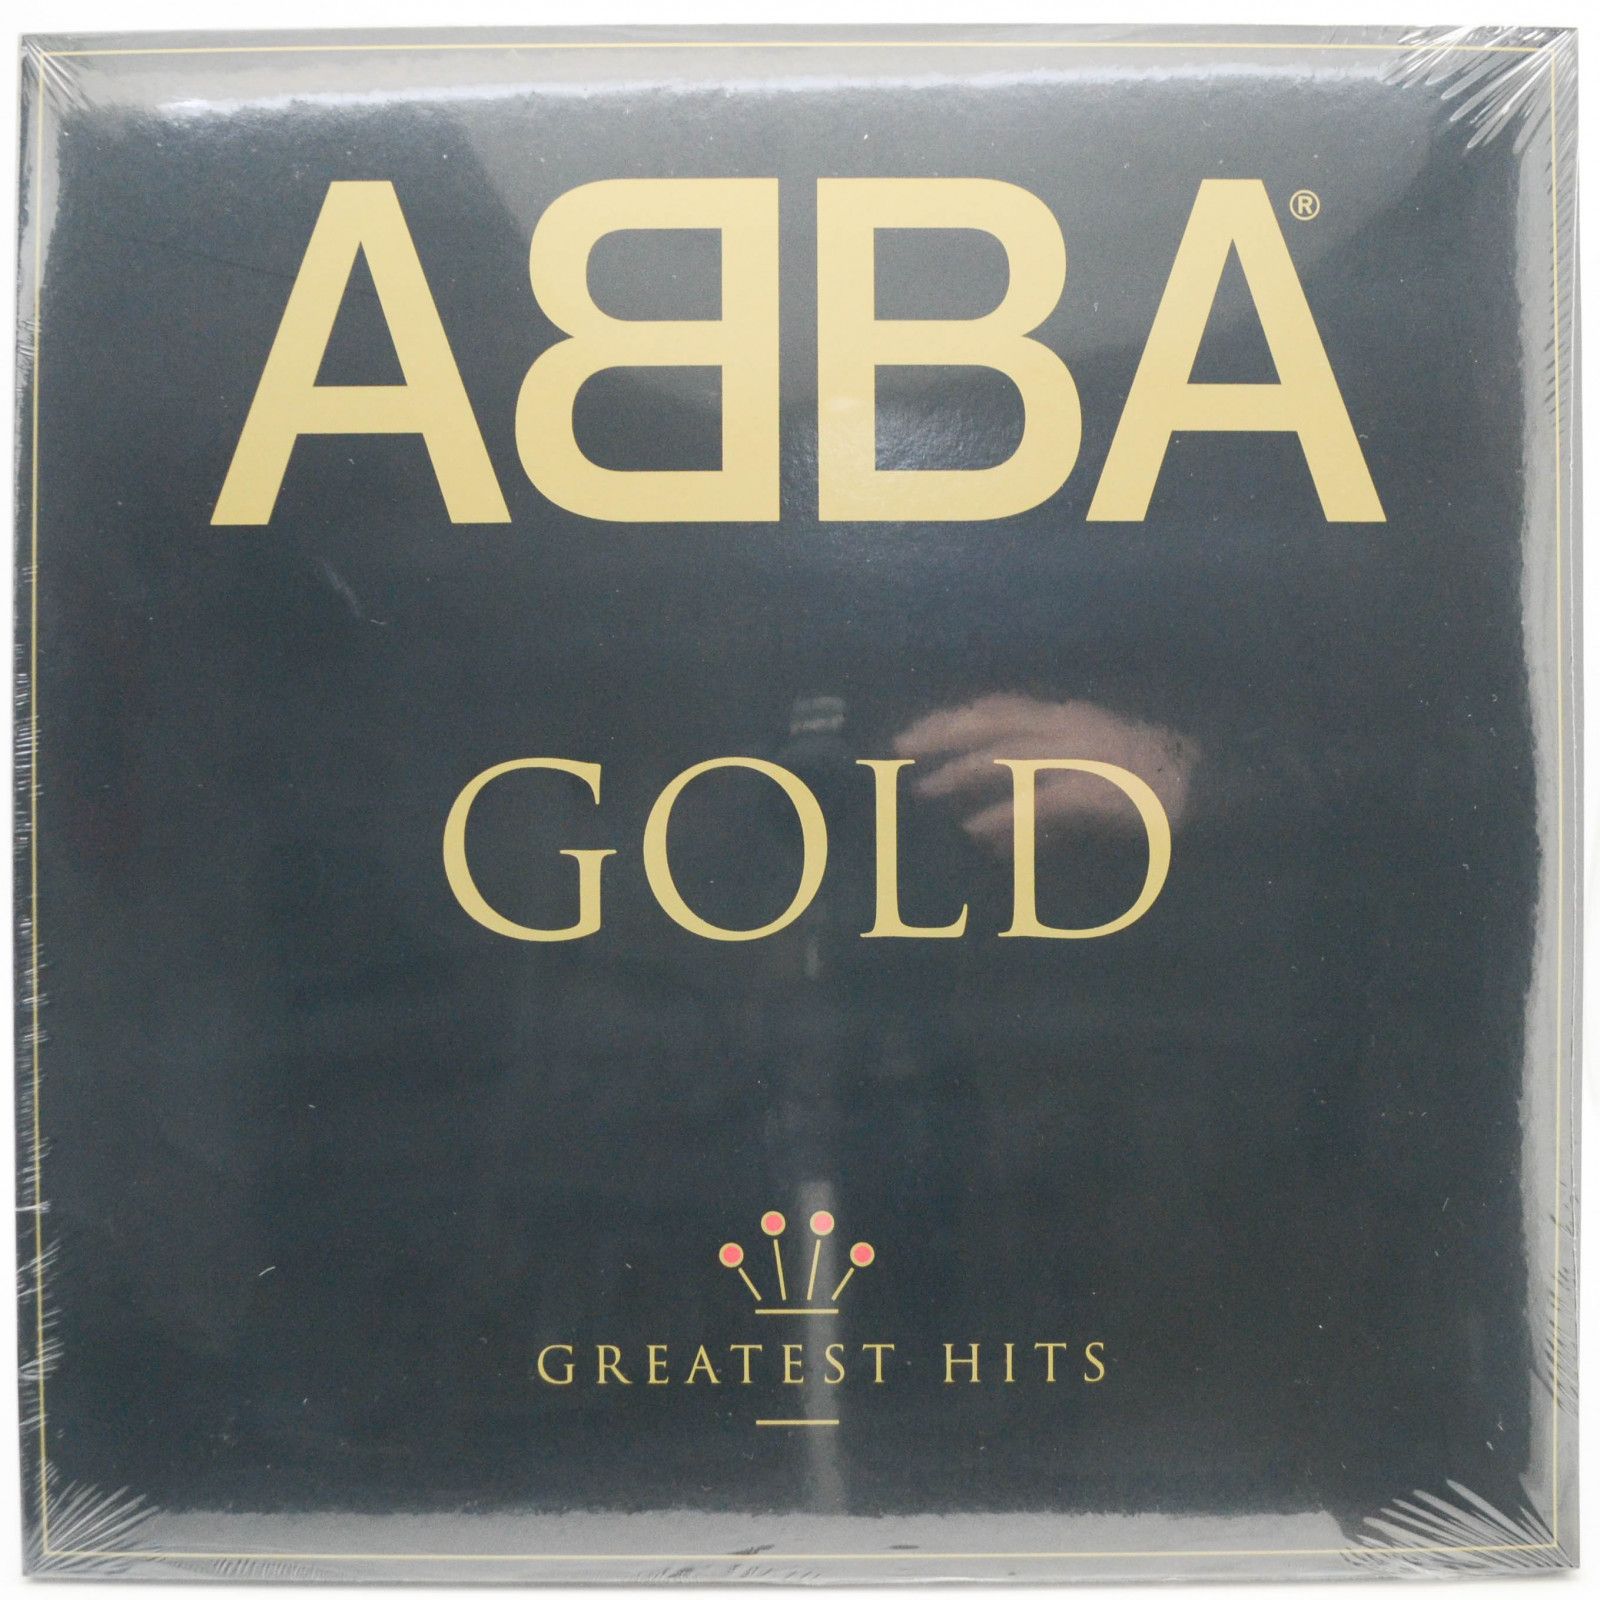 ABBA — Gold (Greatest Hits) (2LP), 1992